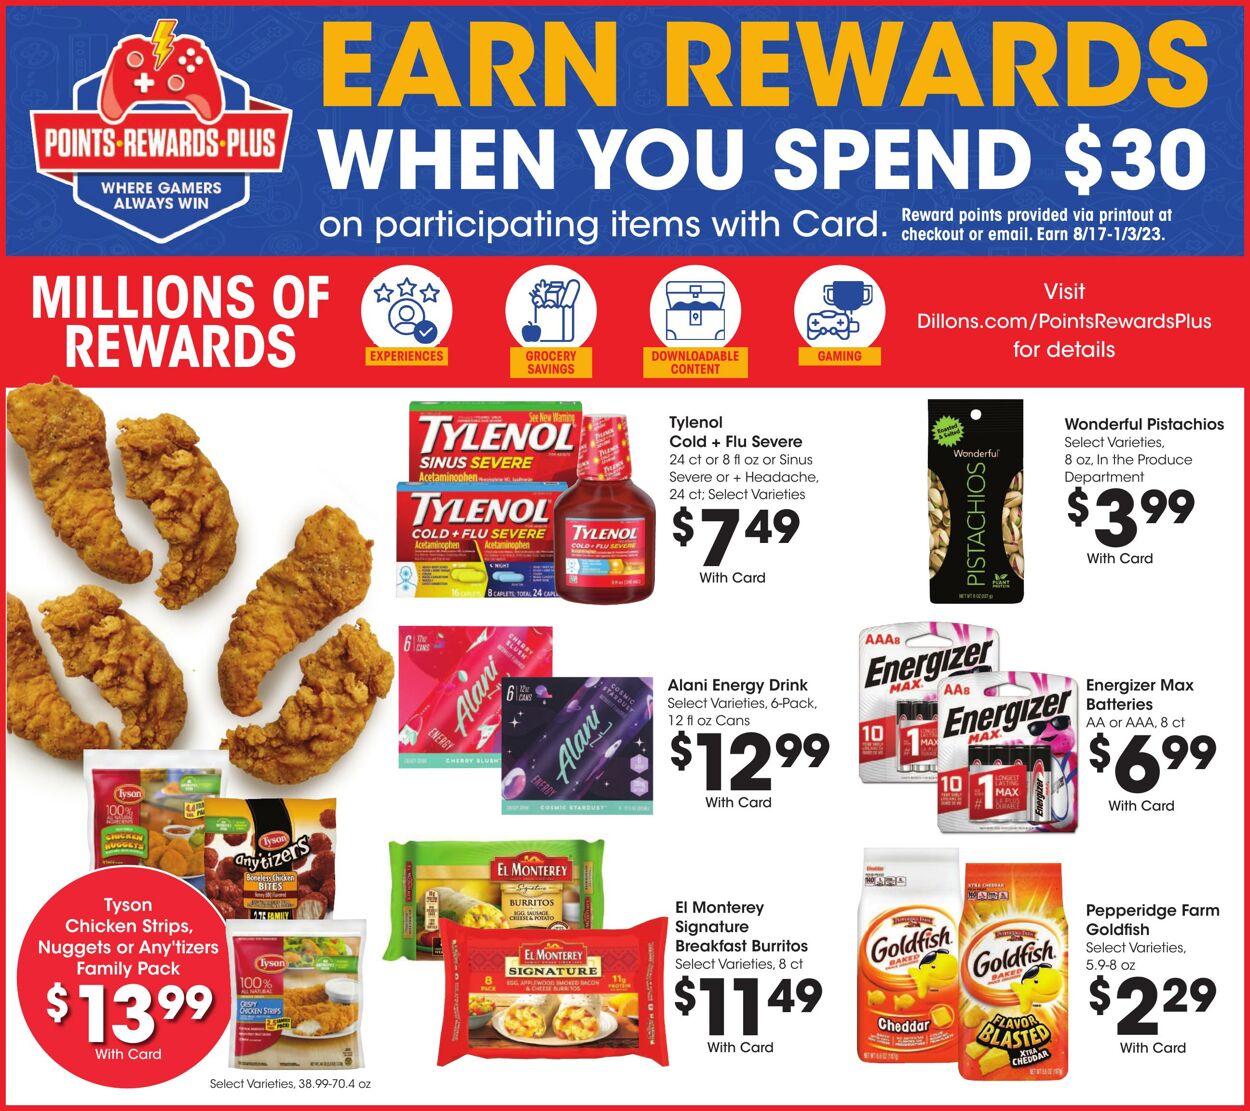 Weekly ad Dillons 11/25/2022 - 11/29/2022